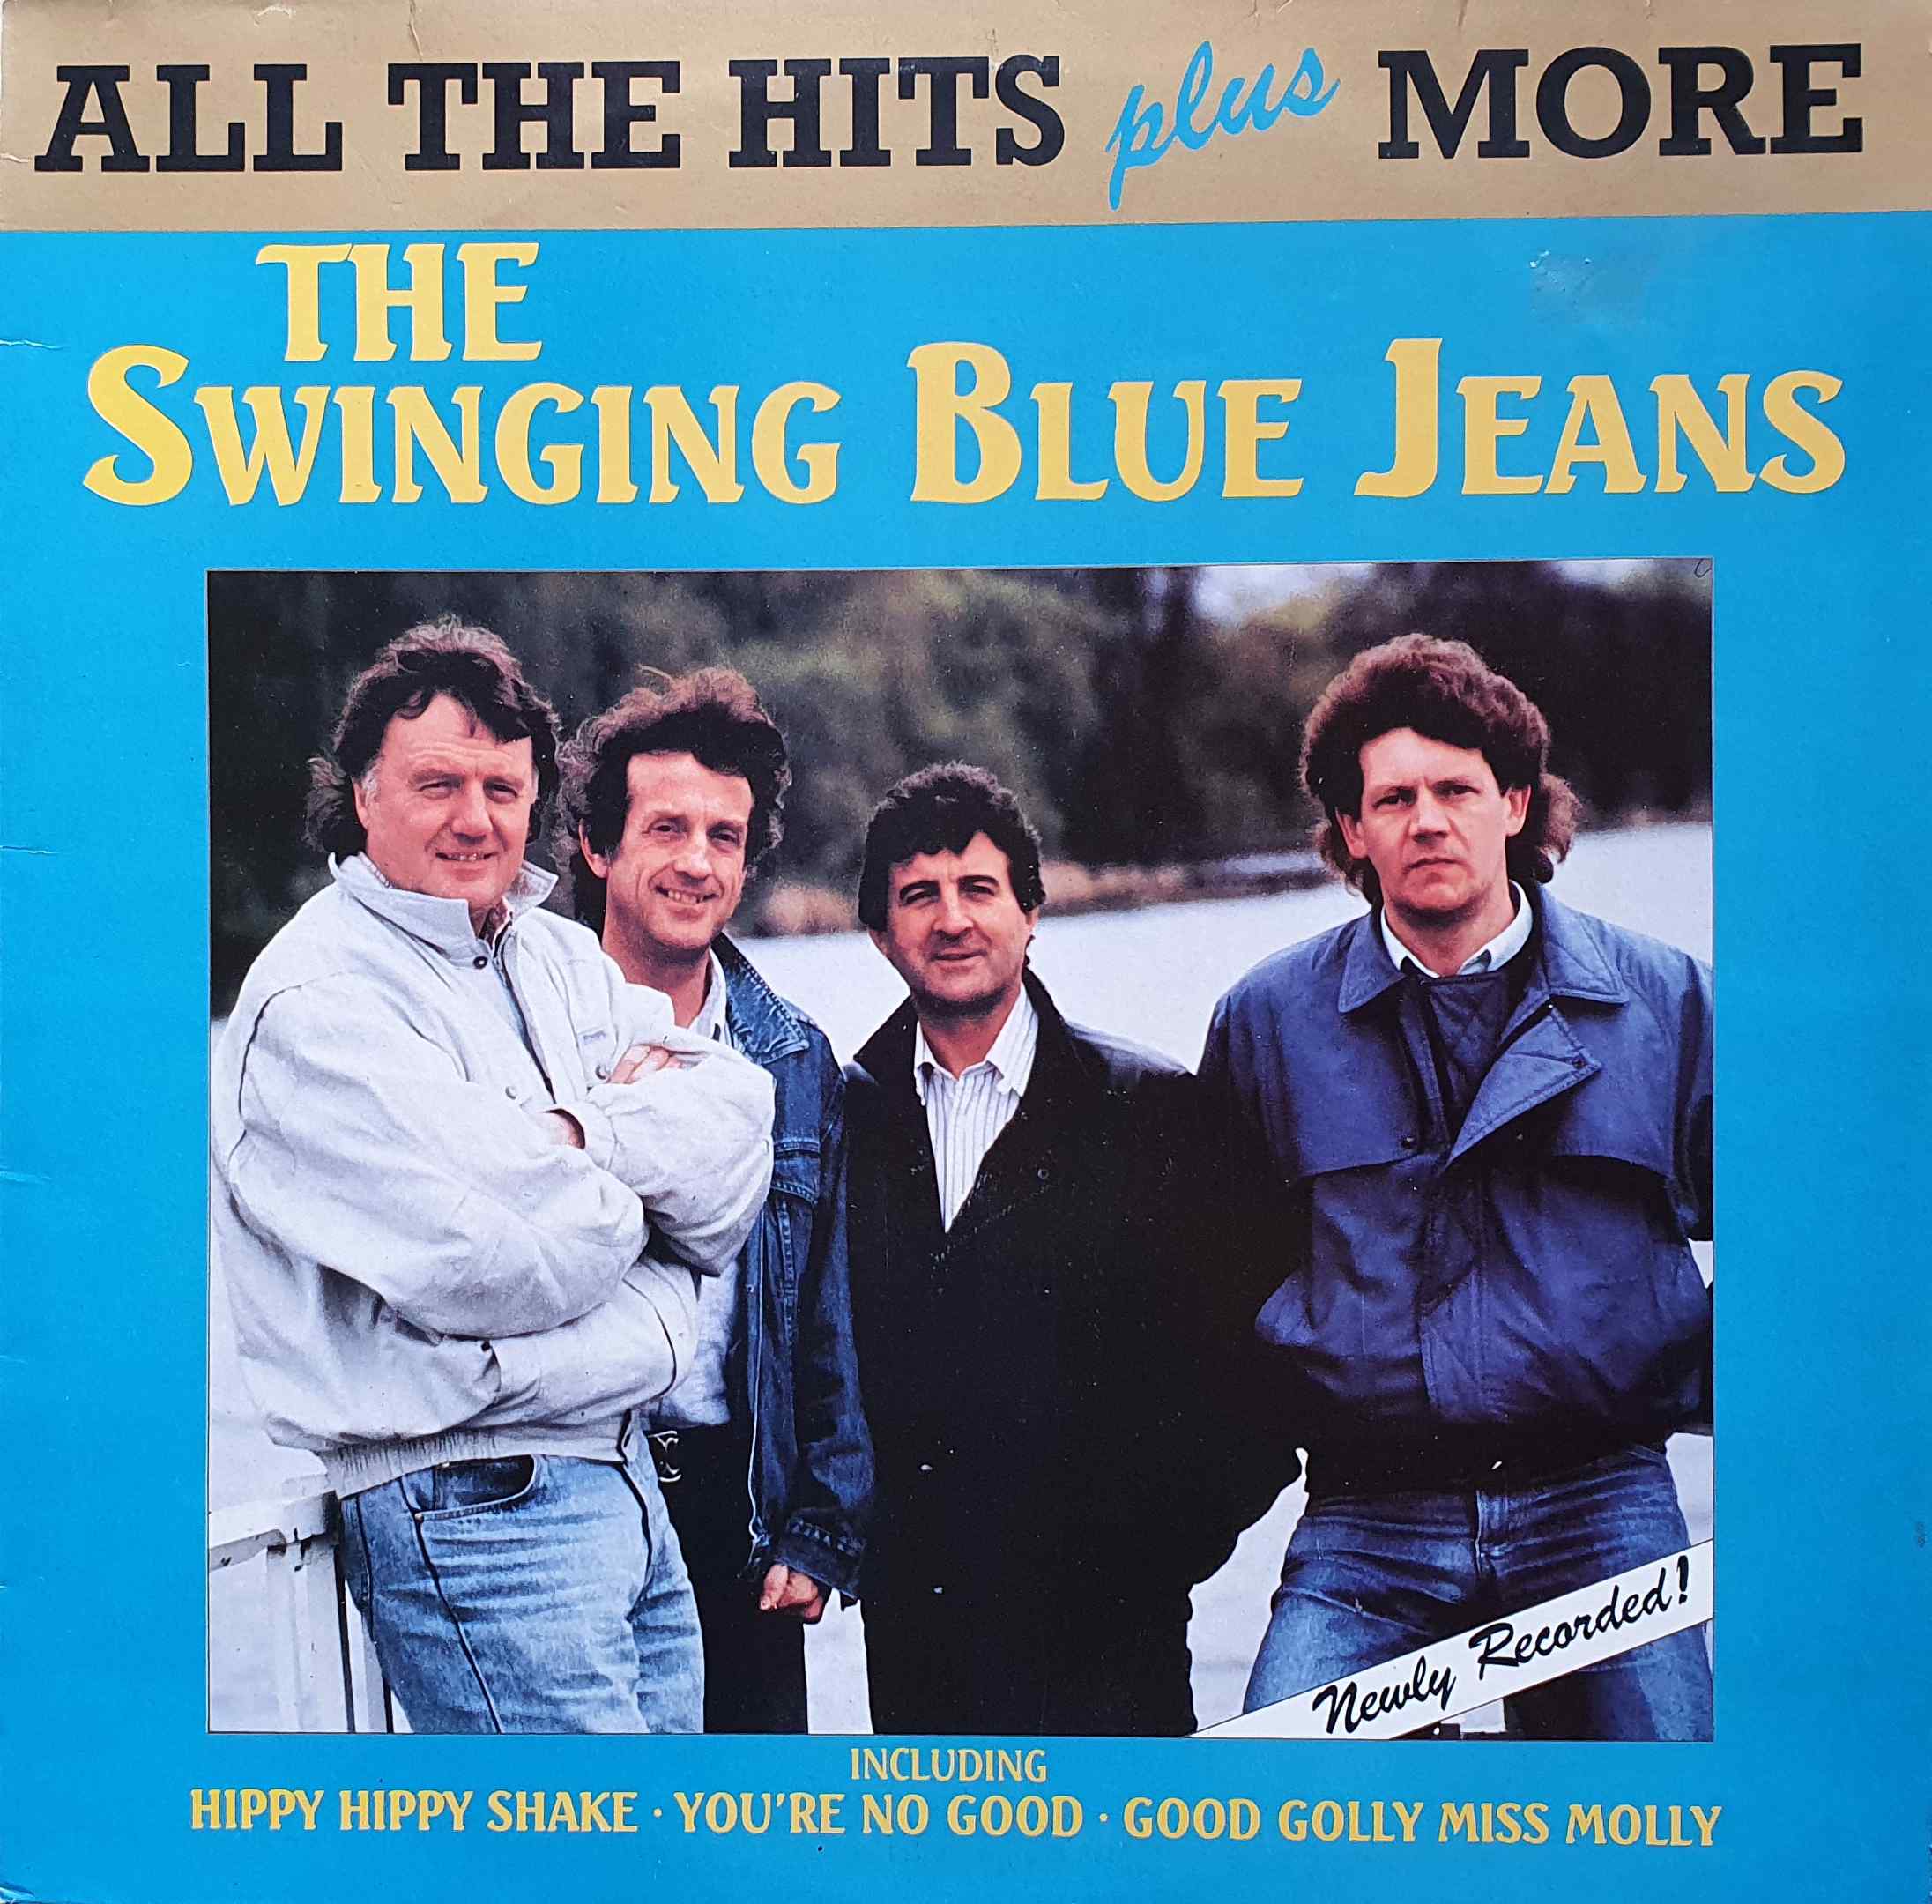 Picture of PRST 003 All the hits plus more - Swinging Blue Jeans by artist Blue Jeans from the BBC albums - Records and Tapes library